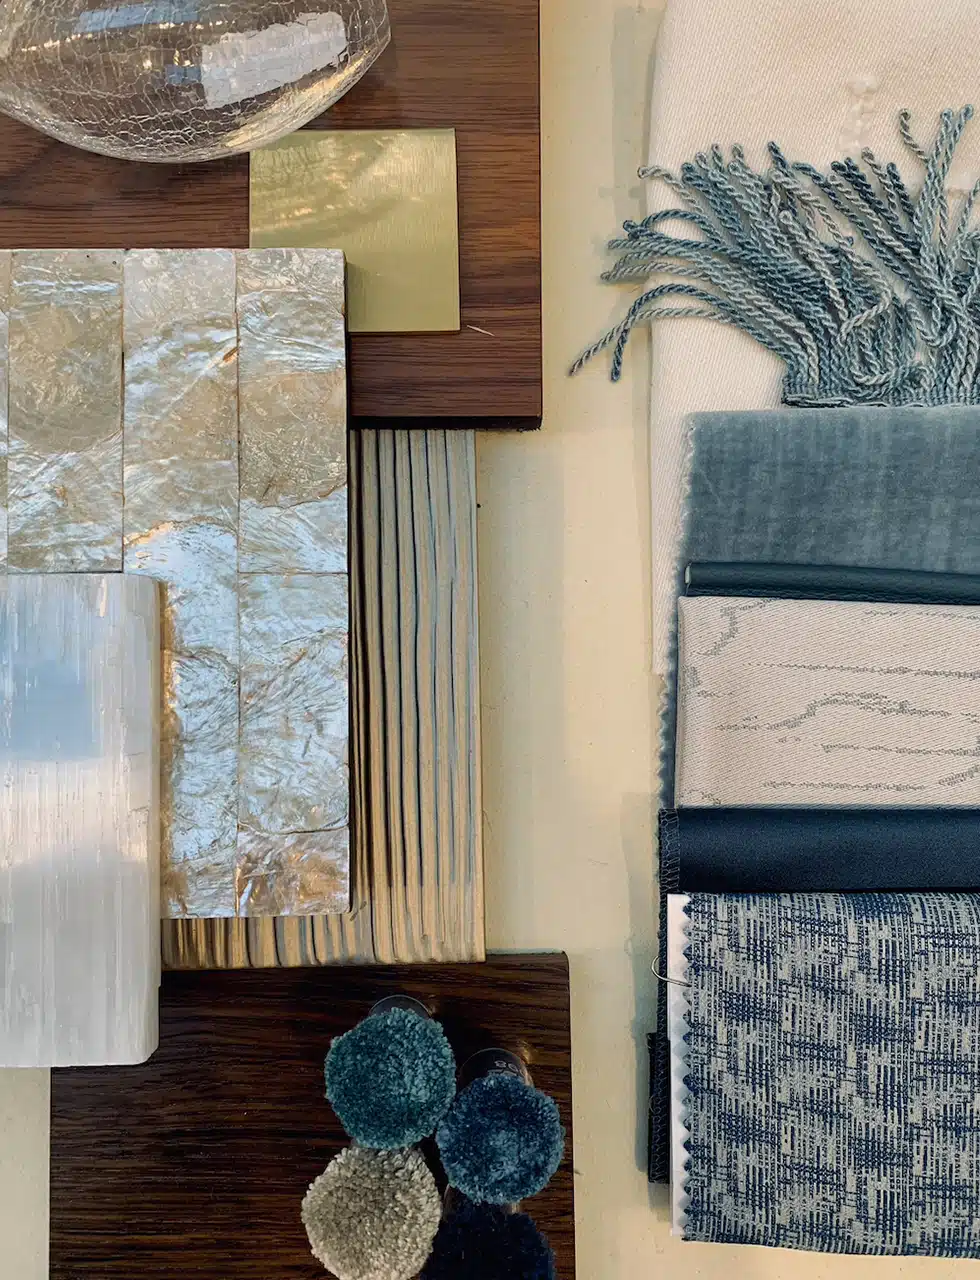 An interior design scheming board, a source of inspiration when planning a luxurious space